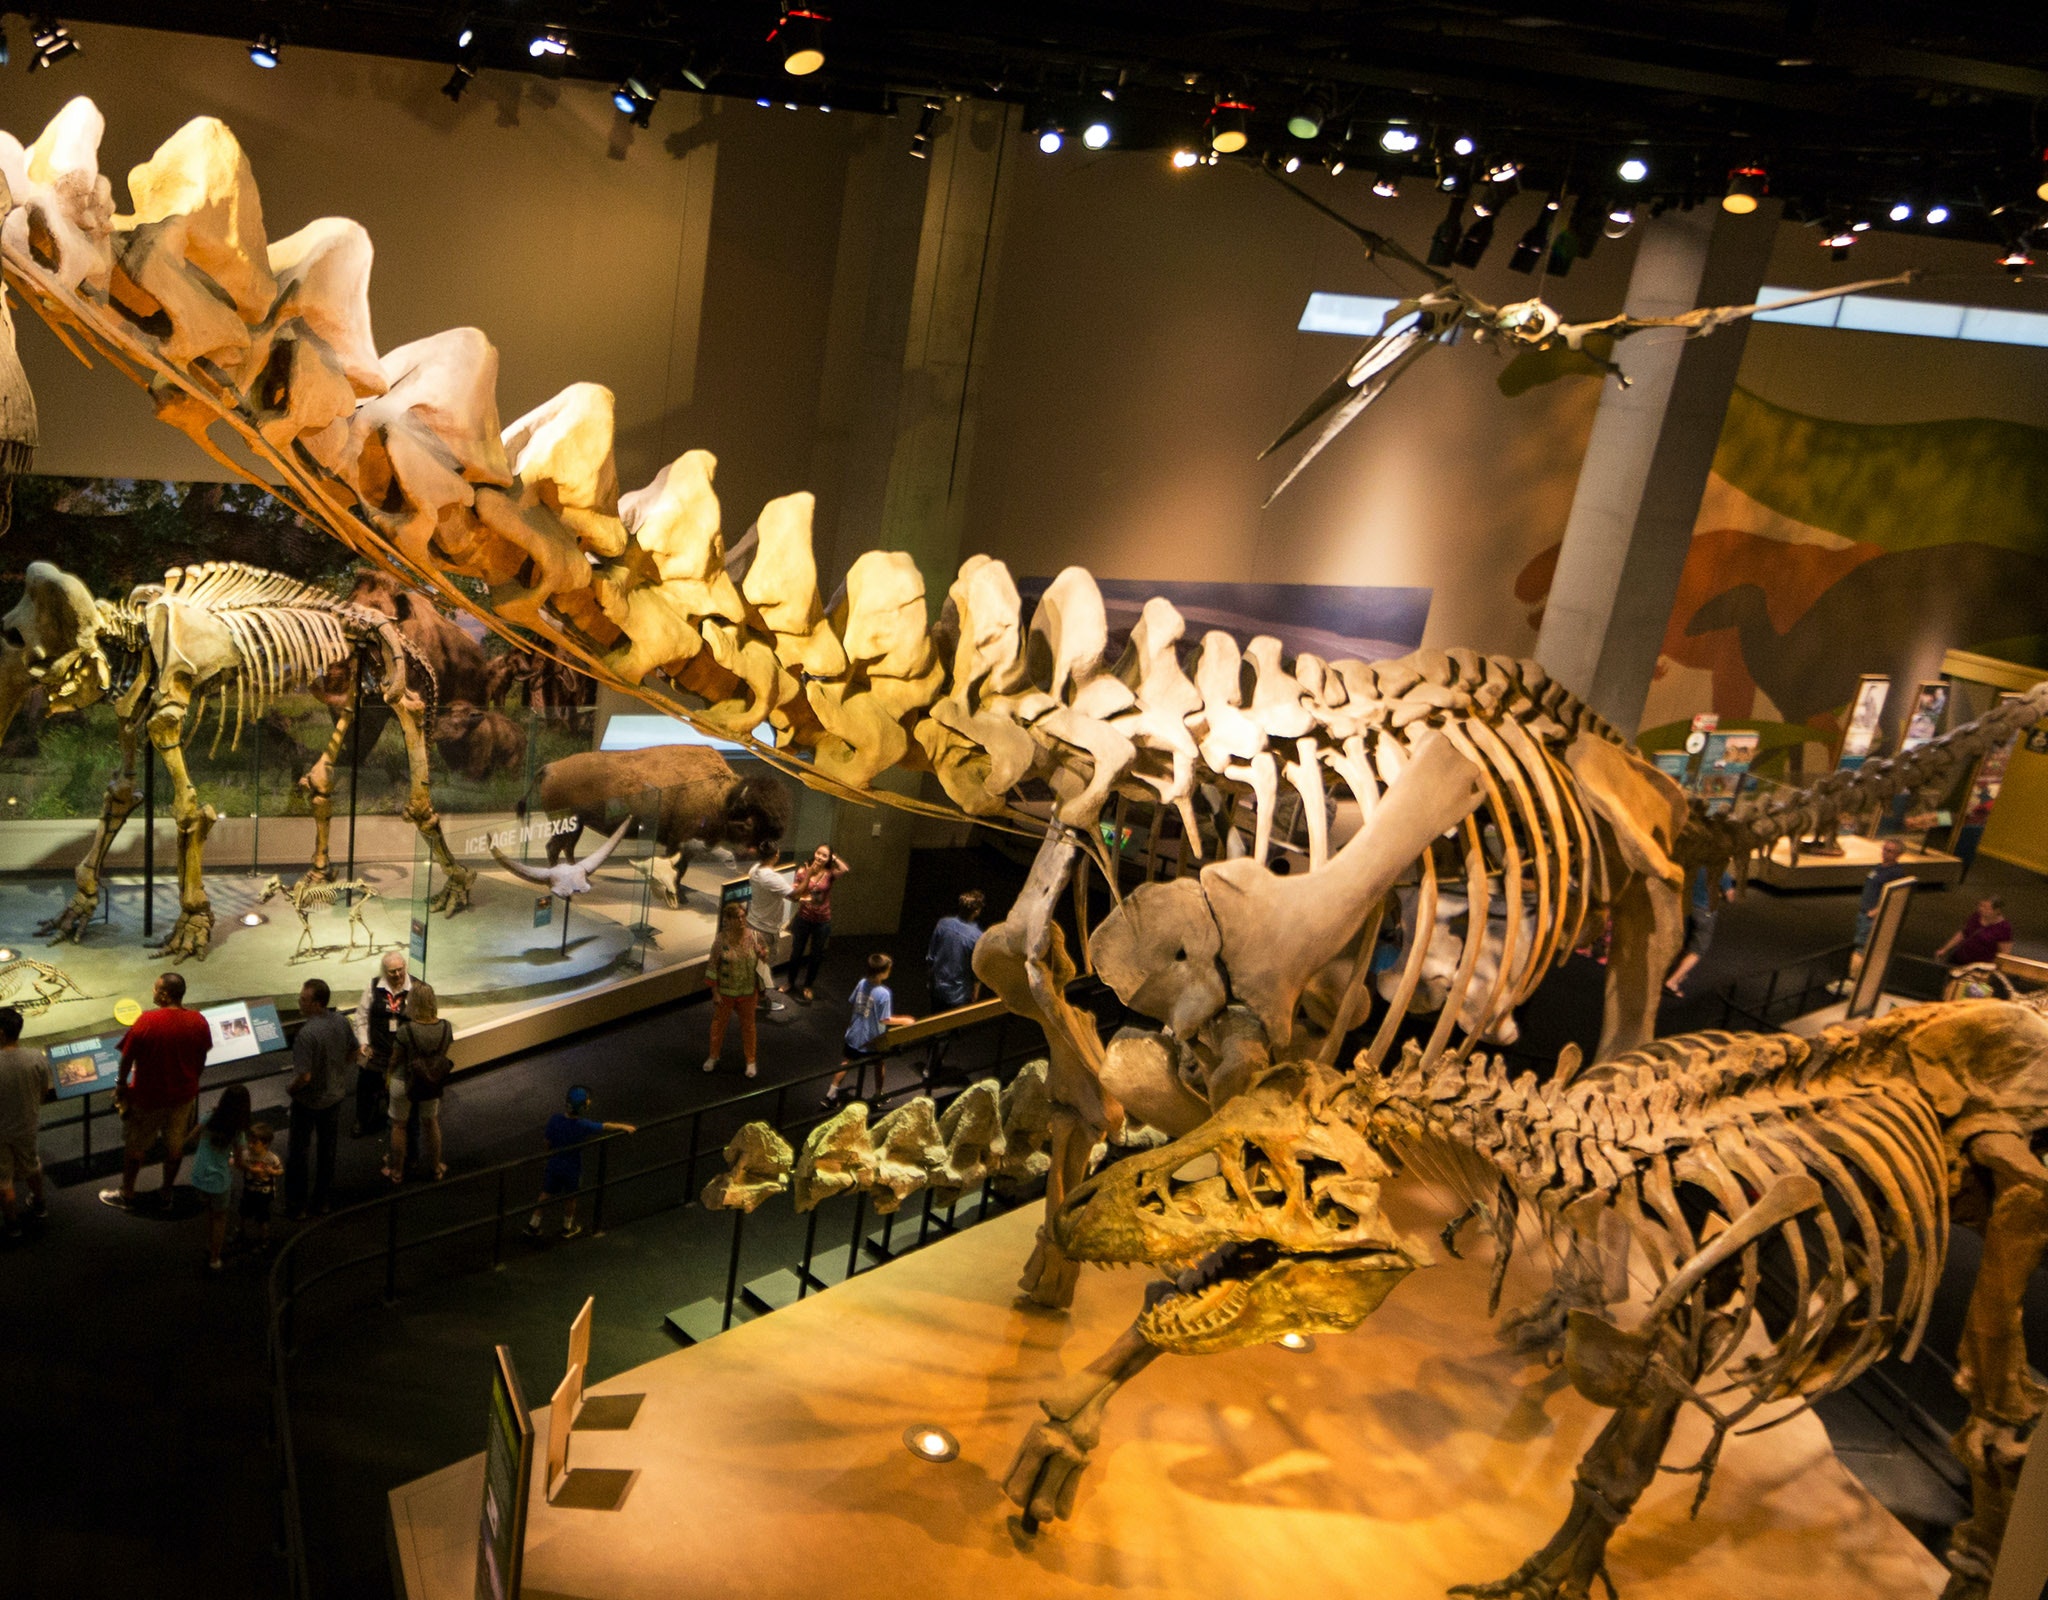 DFW family membership deals, Perot Museum of Nature & Science